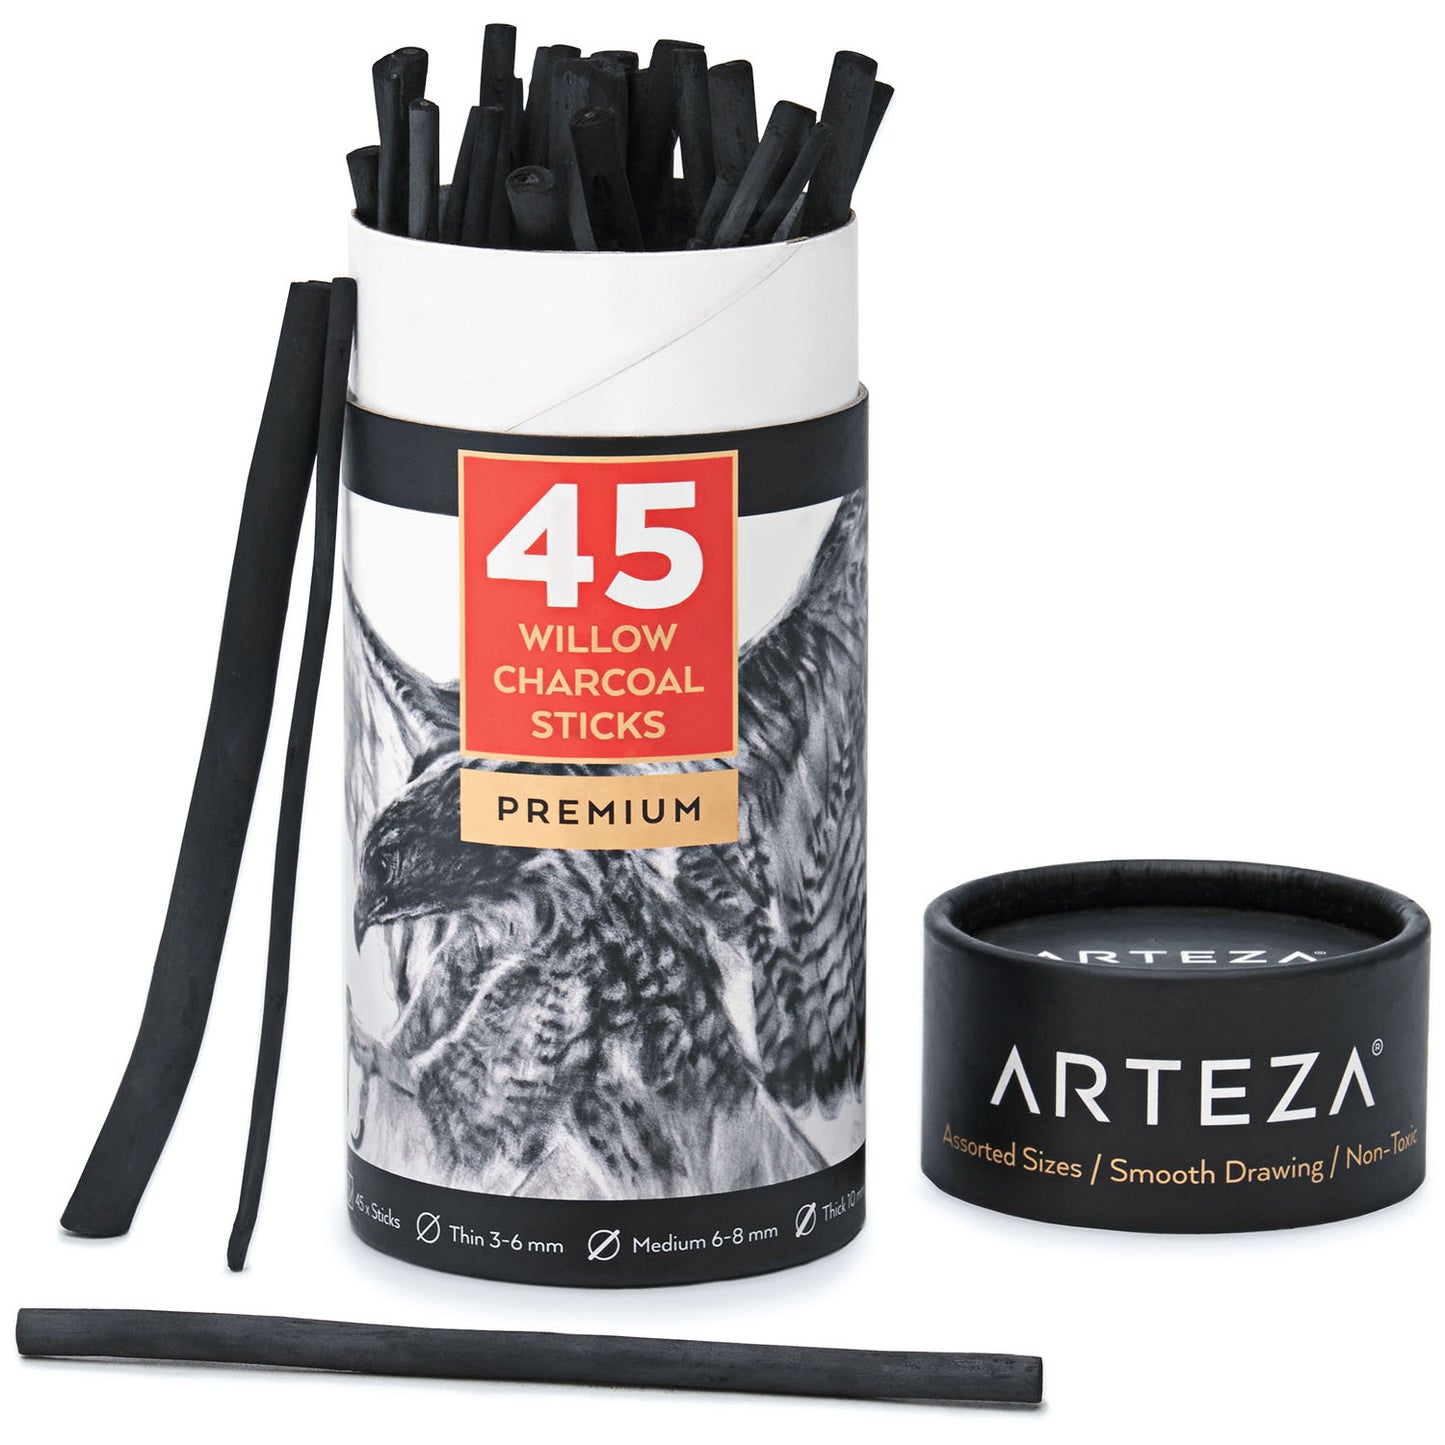 Generals Willow Charcoal - 5 Assorted Sticks with Kneaded Eraser